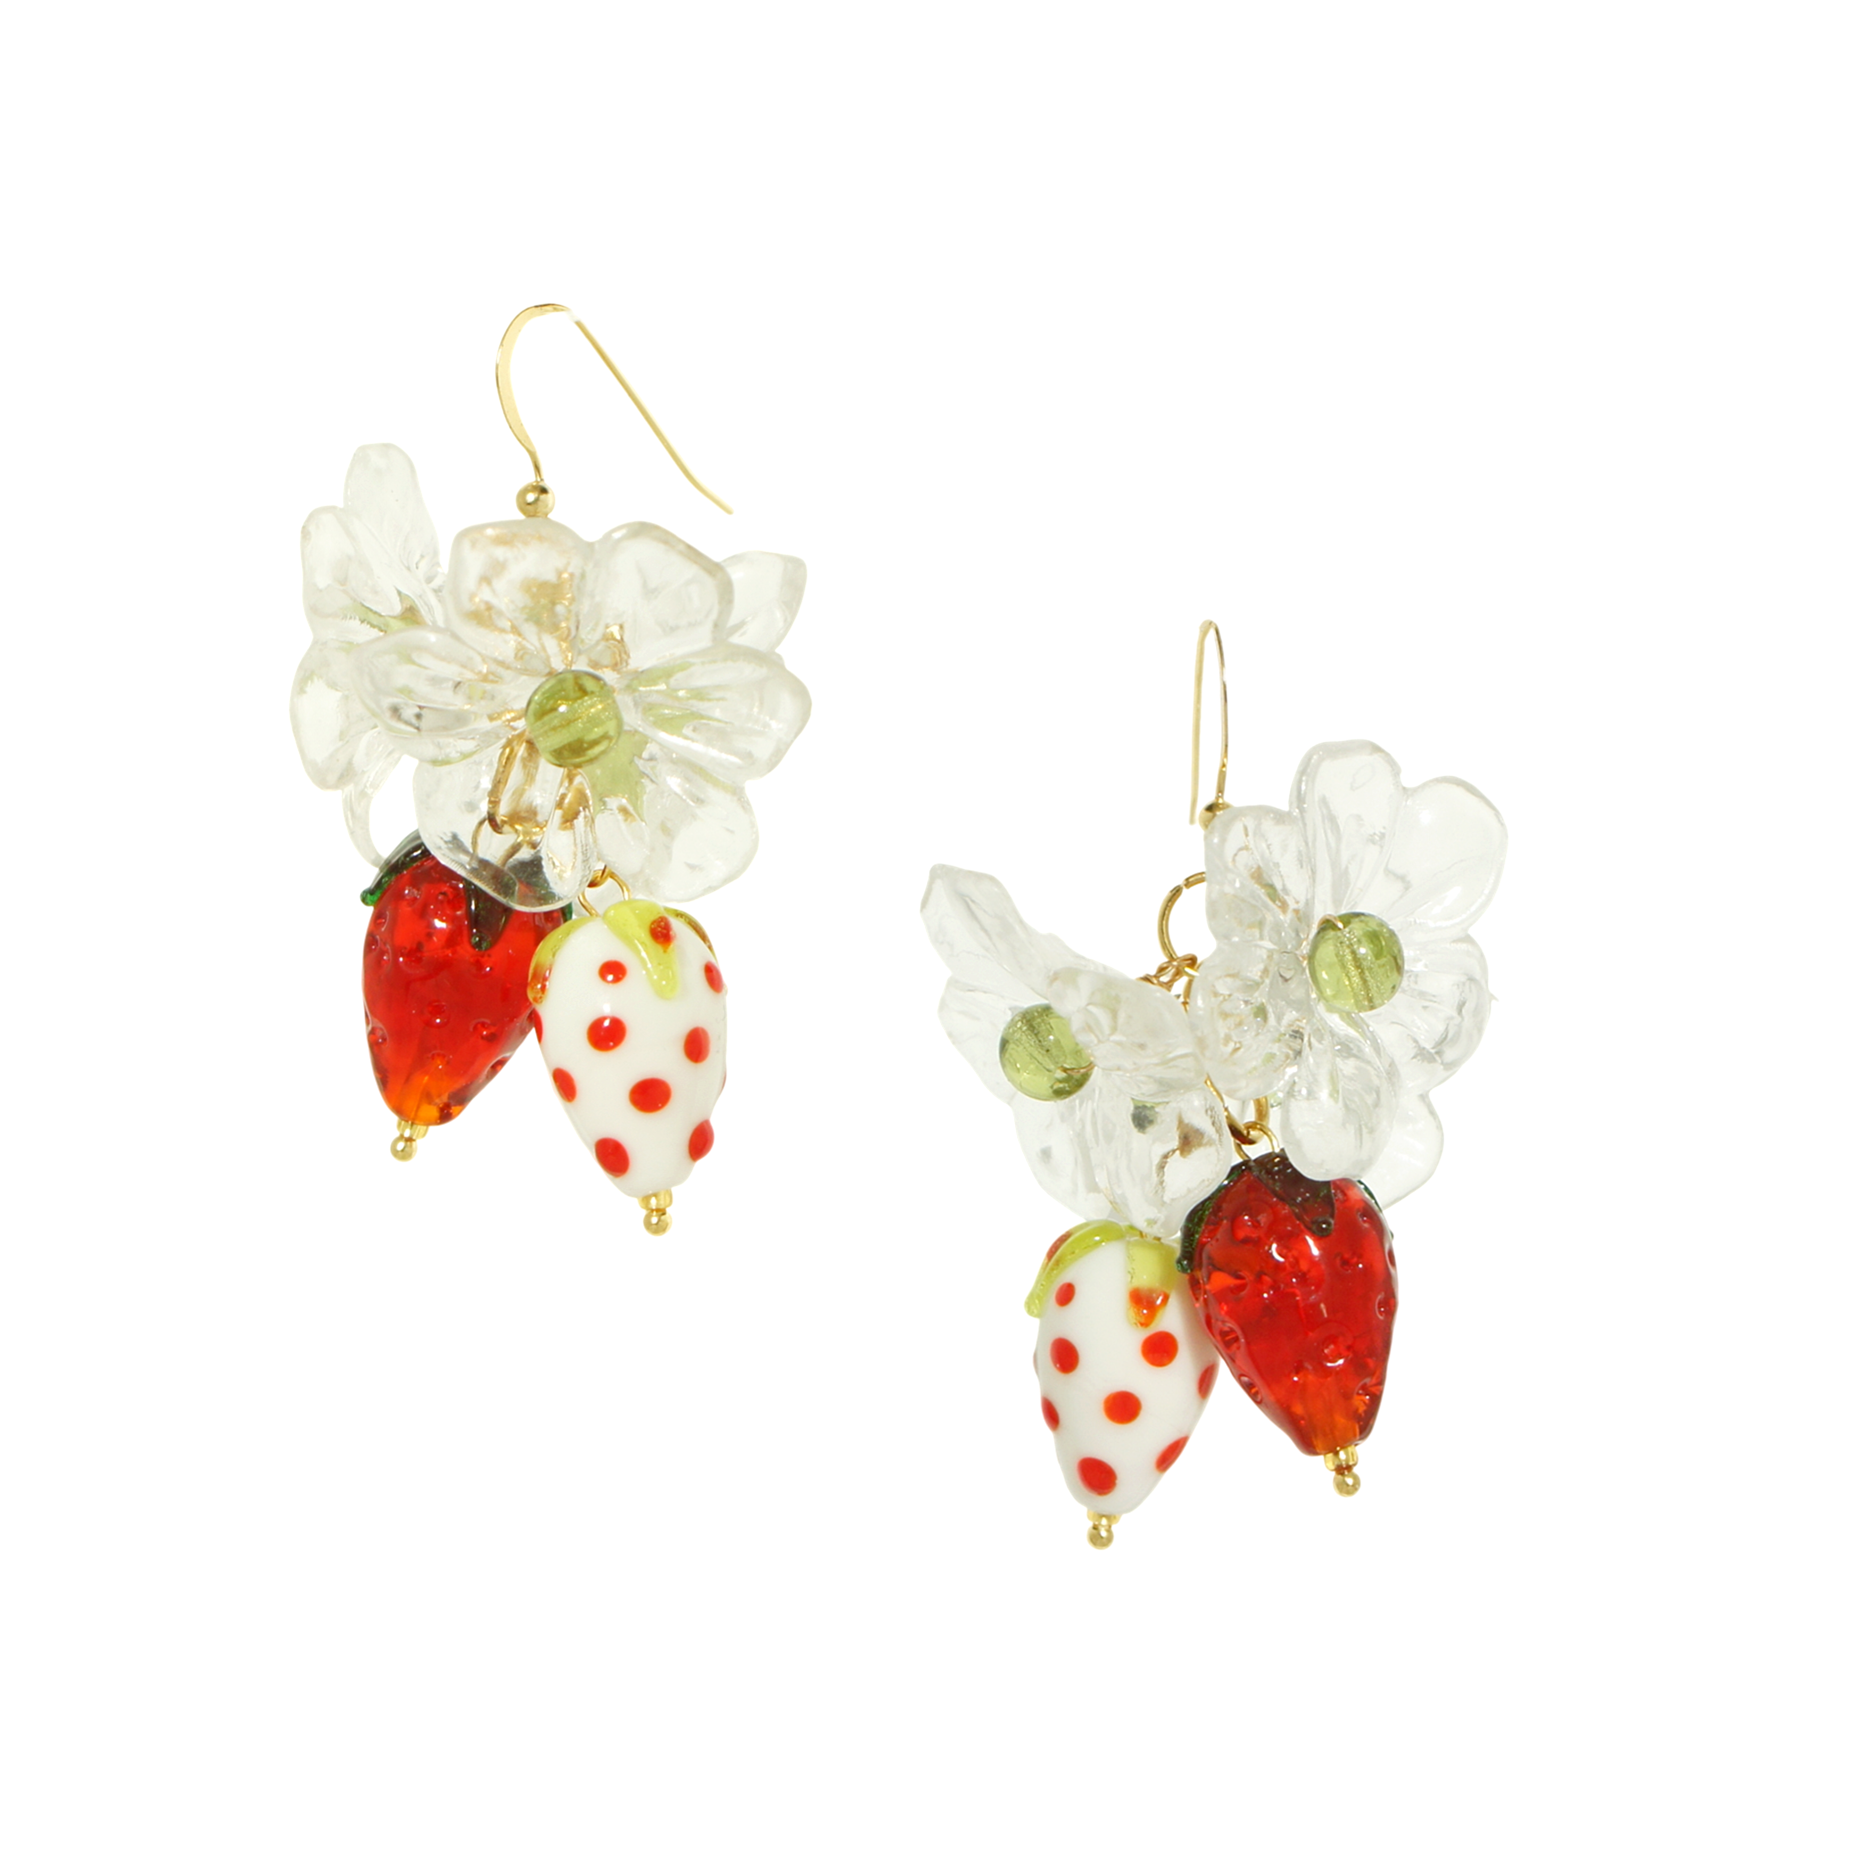 Strawberry Fields Statement Earrings with Lampwork Glass Strawberry and Clear Flowers